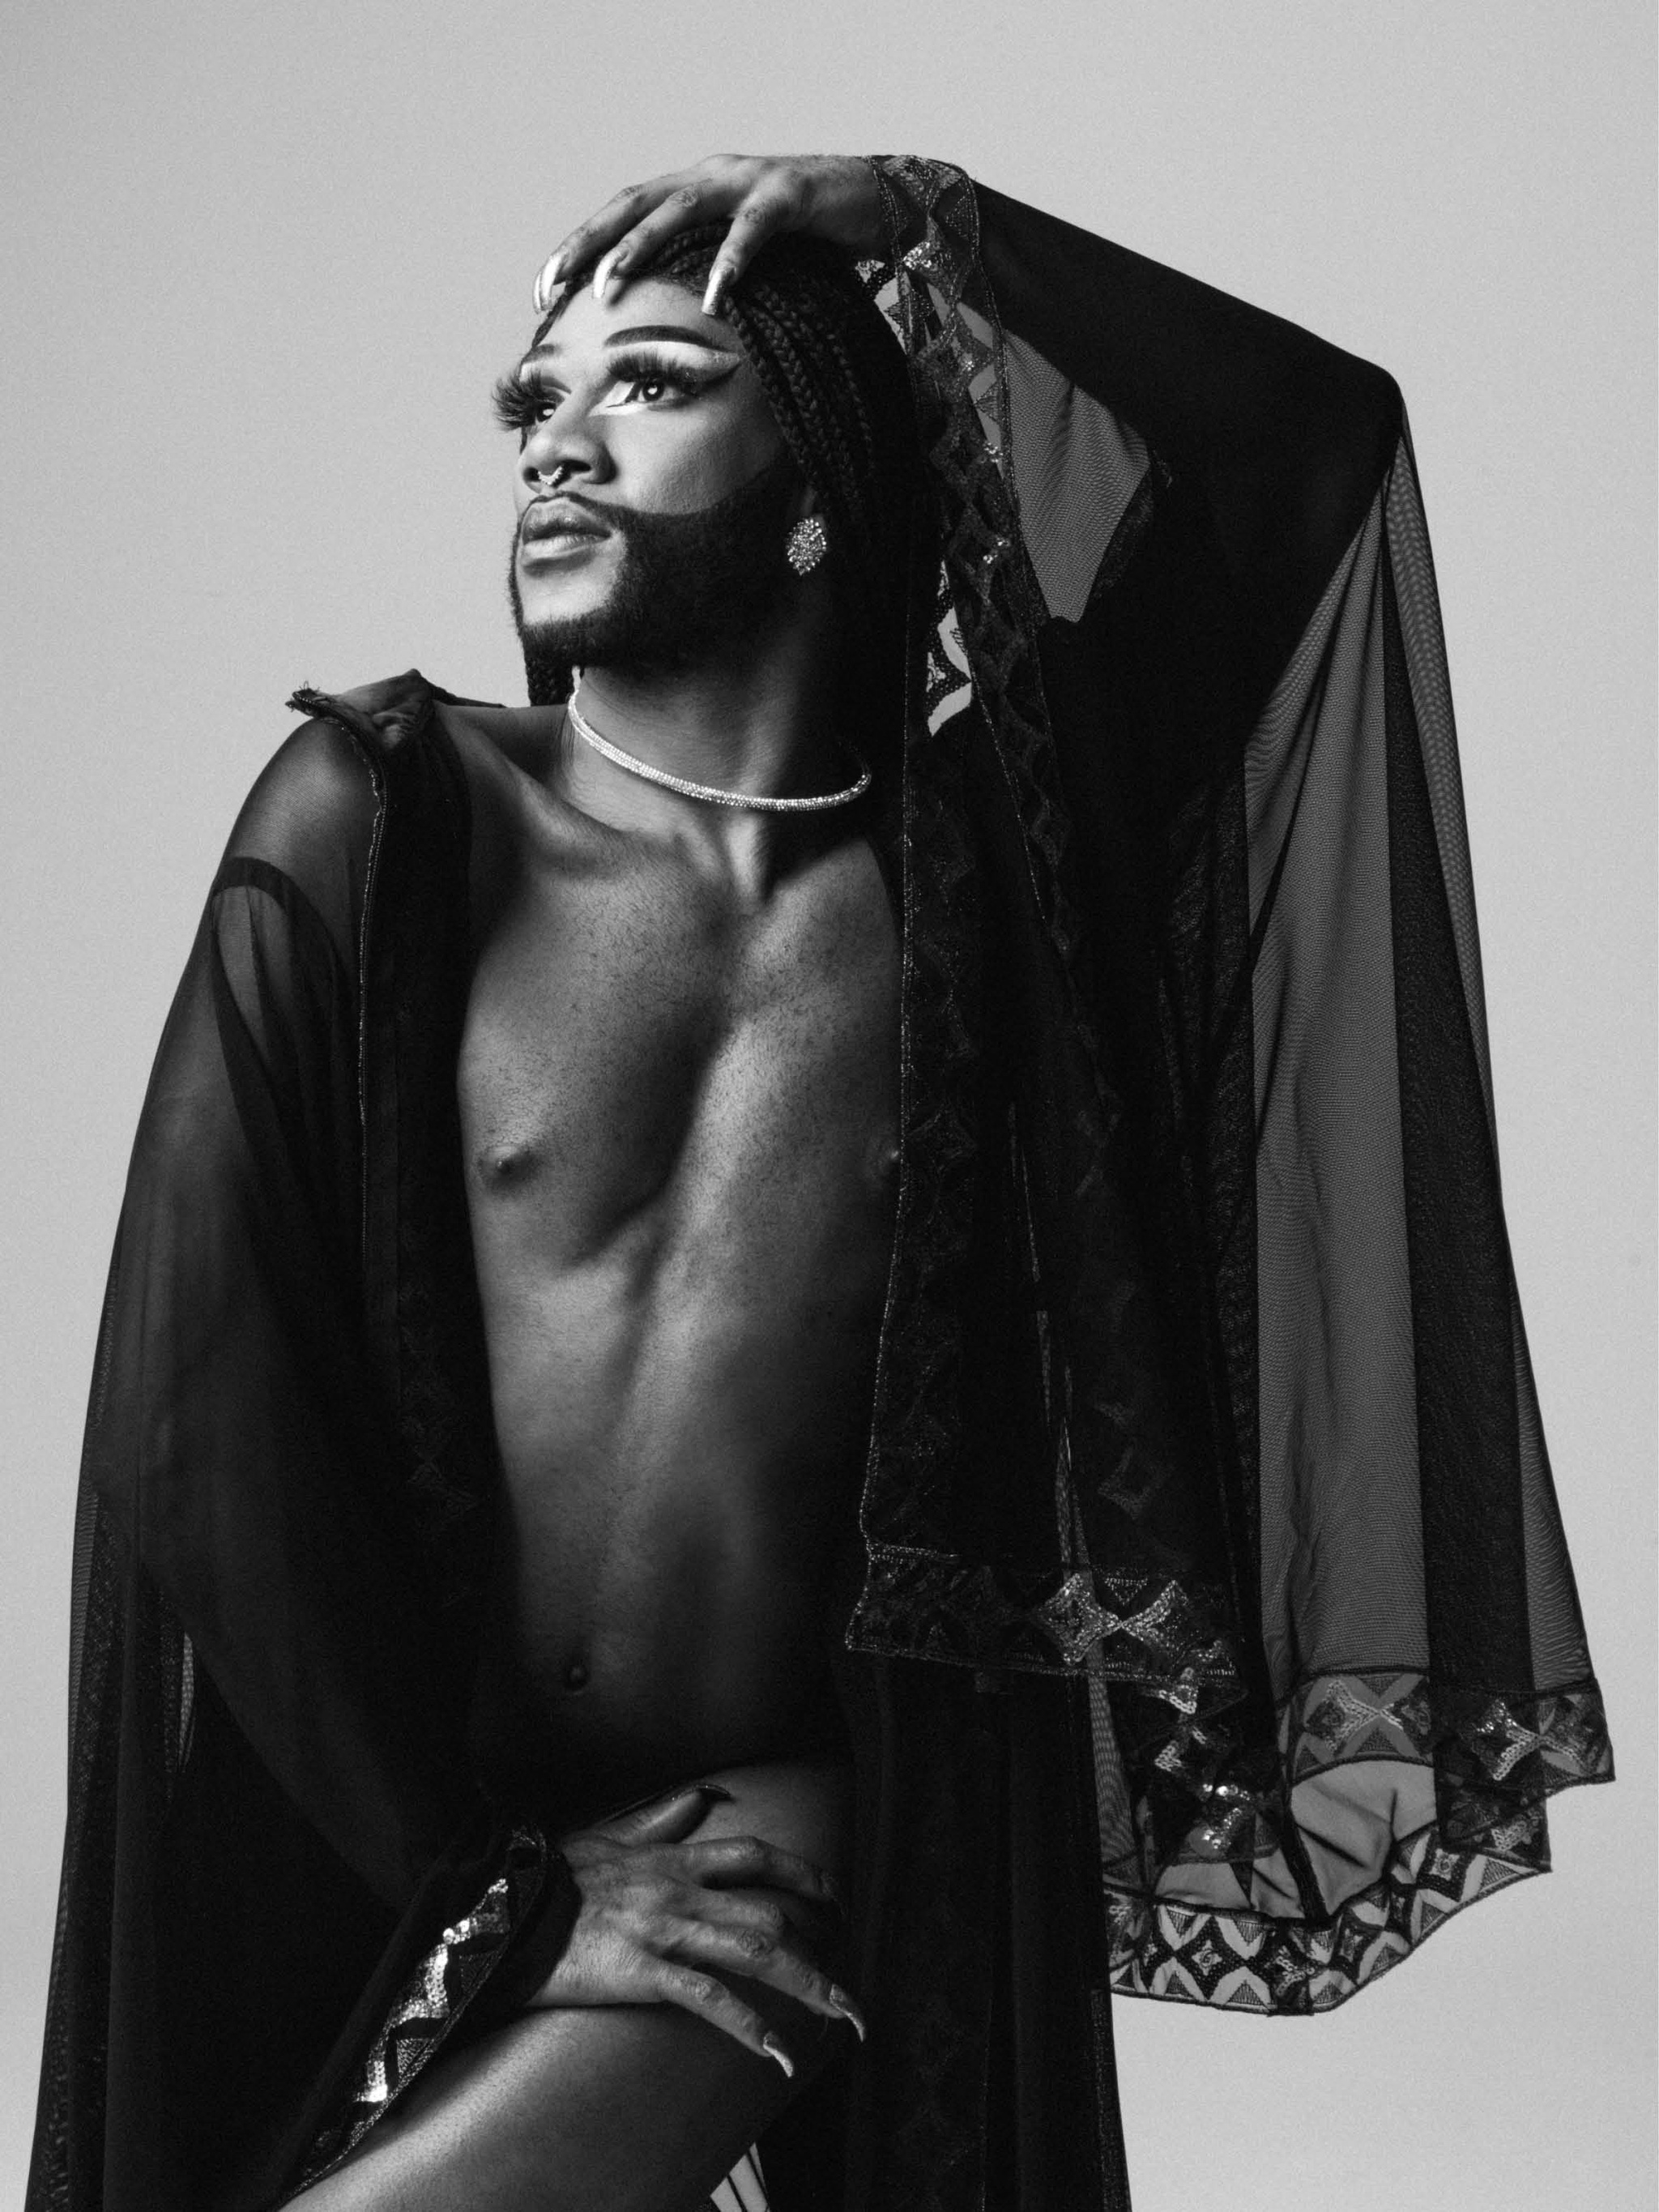 Cain Coleman, a Black multihyphenate drag performer, poses with their body slightly twisted looking dramatically upward toward a light source. They have one hand reached up and resting on the crown of their head and the other reaching down to their left hip. Cain wears a long, sheer black garment that includes a covering worn over the crown of their head, embellished at the edges with gold patterning. Cain has a beard that is styled in sharp contrast to the rest of the smooth skin of their cheeks and face. 